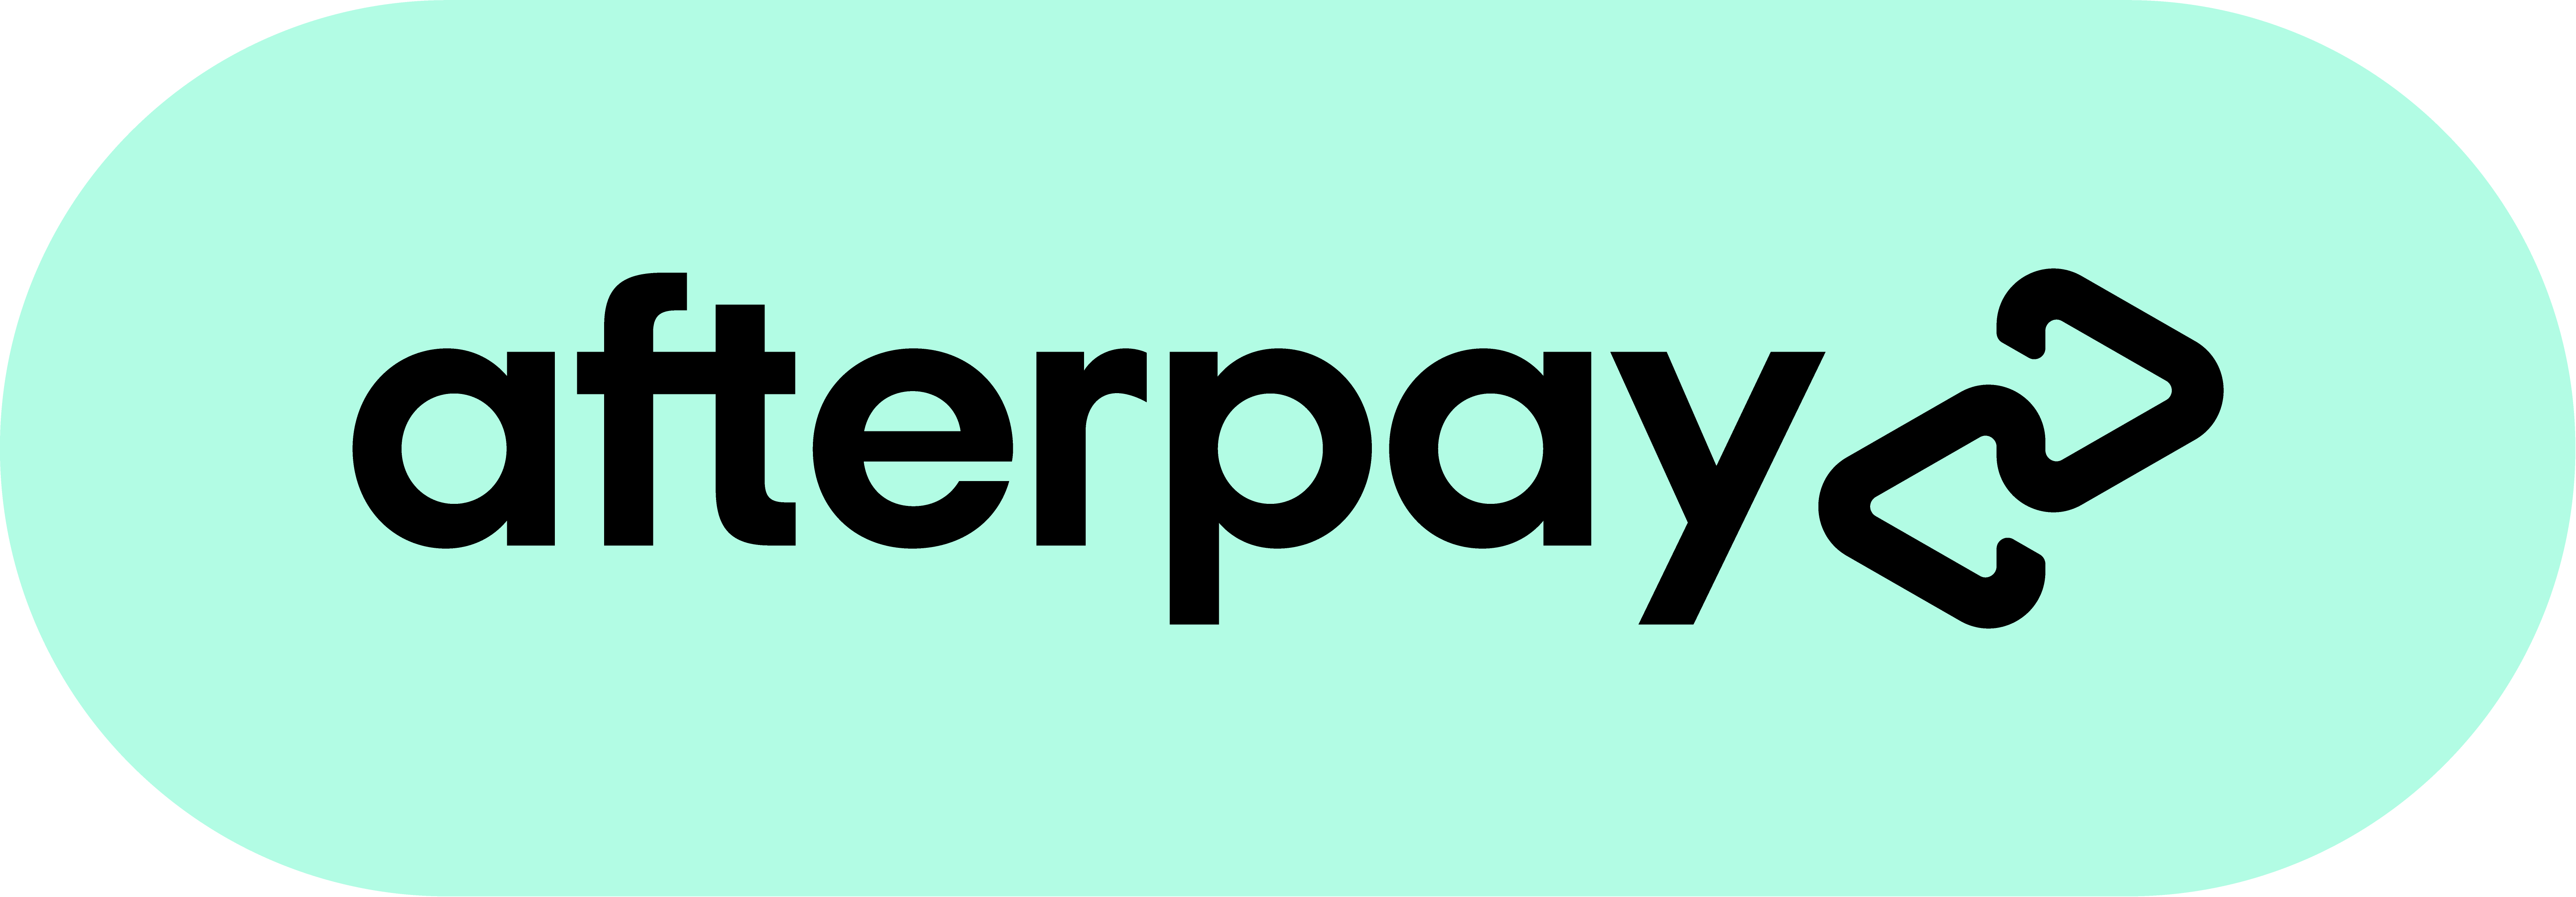 Afterpay - buy now, pay later